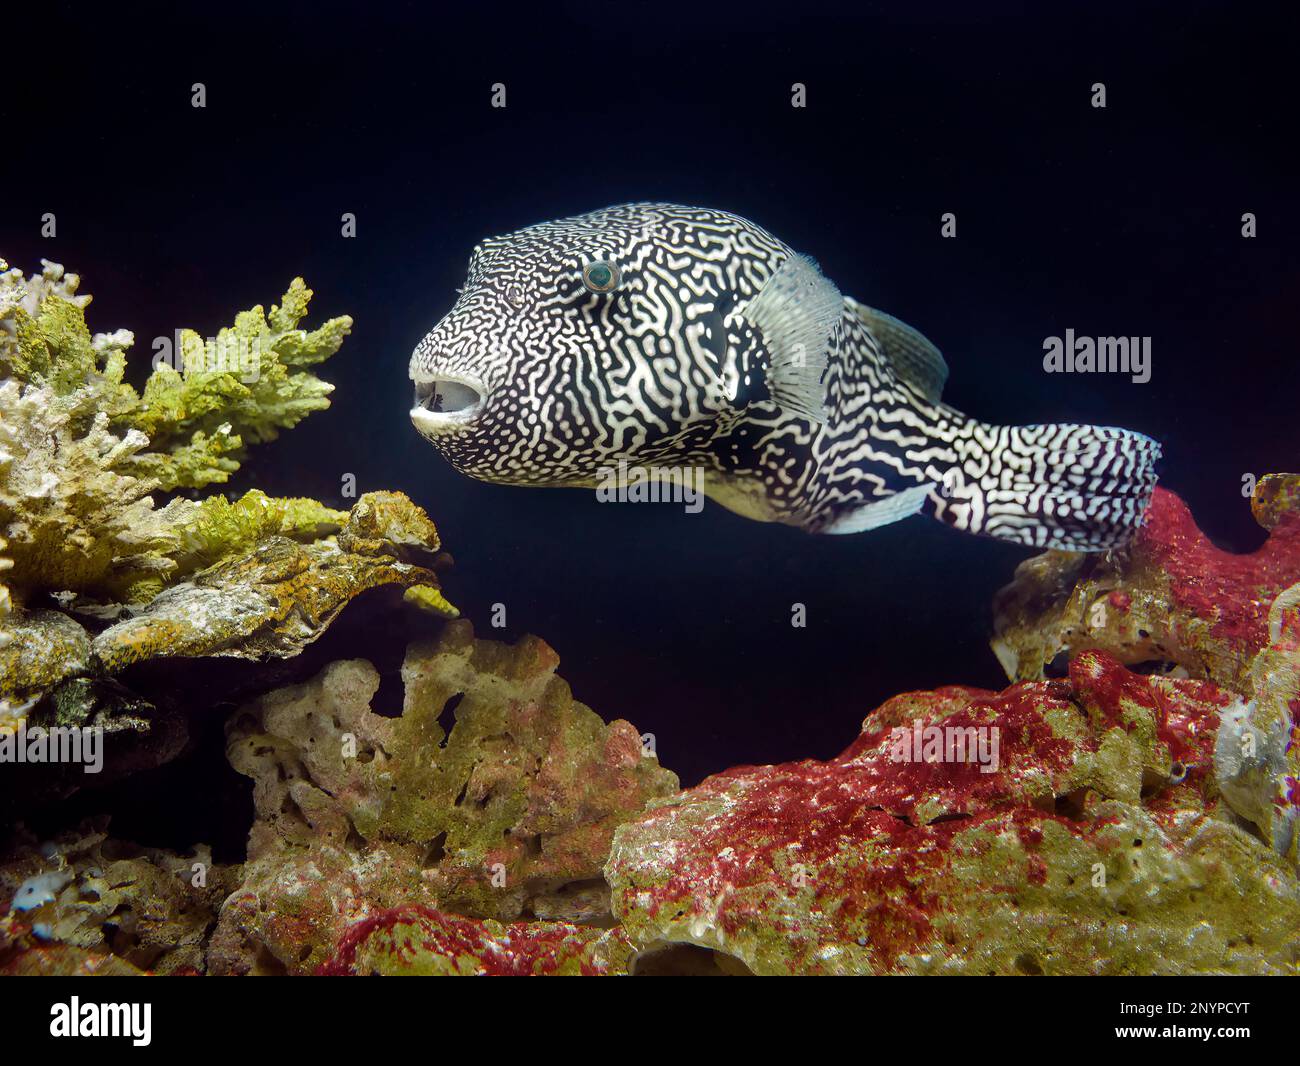 Close up A map puffer fish with black and white pattern, underwater with corals ans stone background, Arothron mappa, Phuket Aquarium Stock Photo